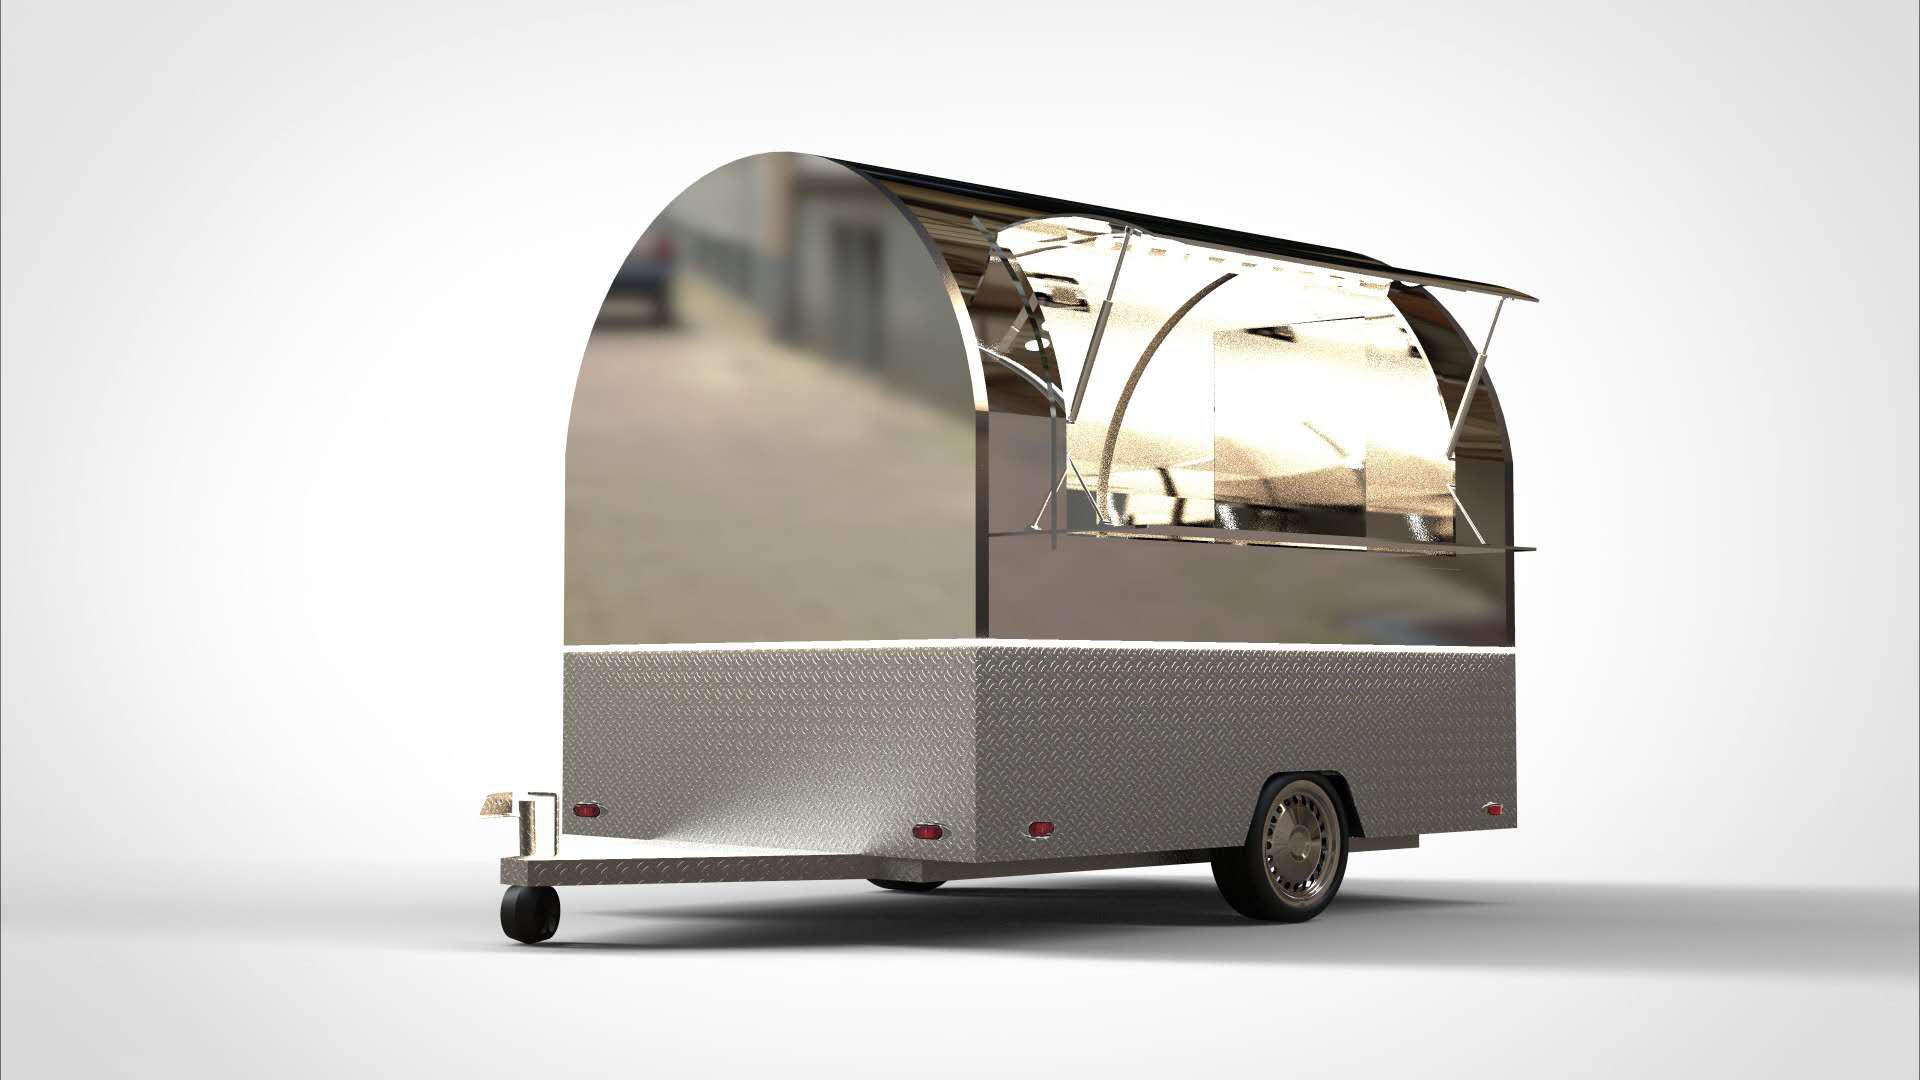 Full Alumunim Round Food Trailers Hot selling from China manufacturer of food trailers